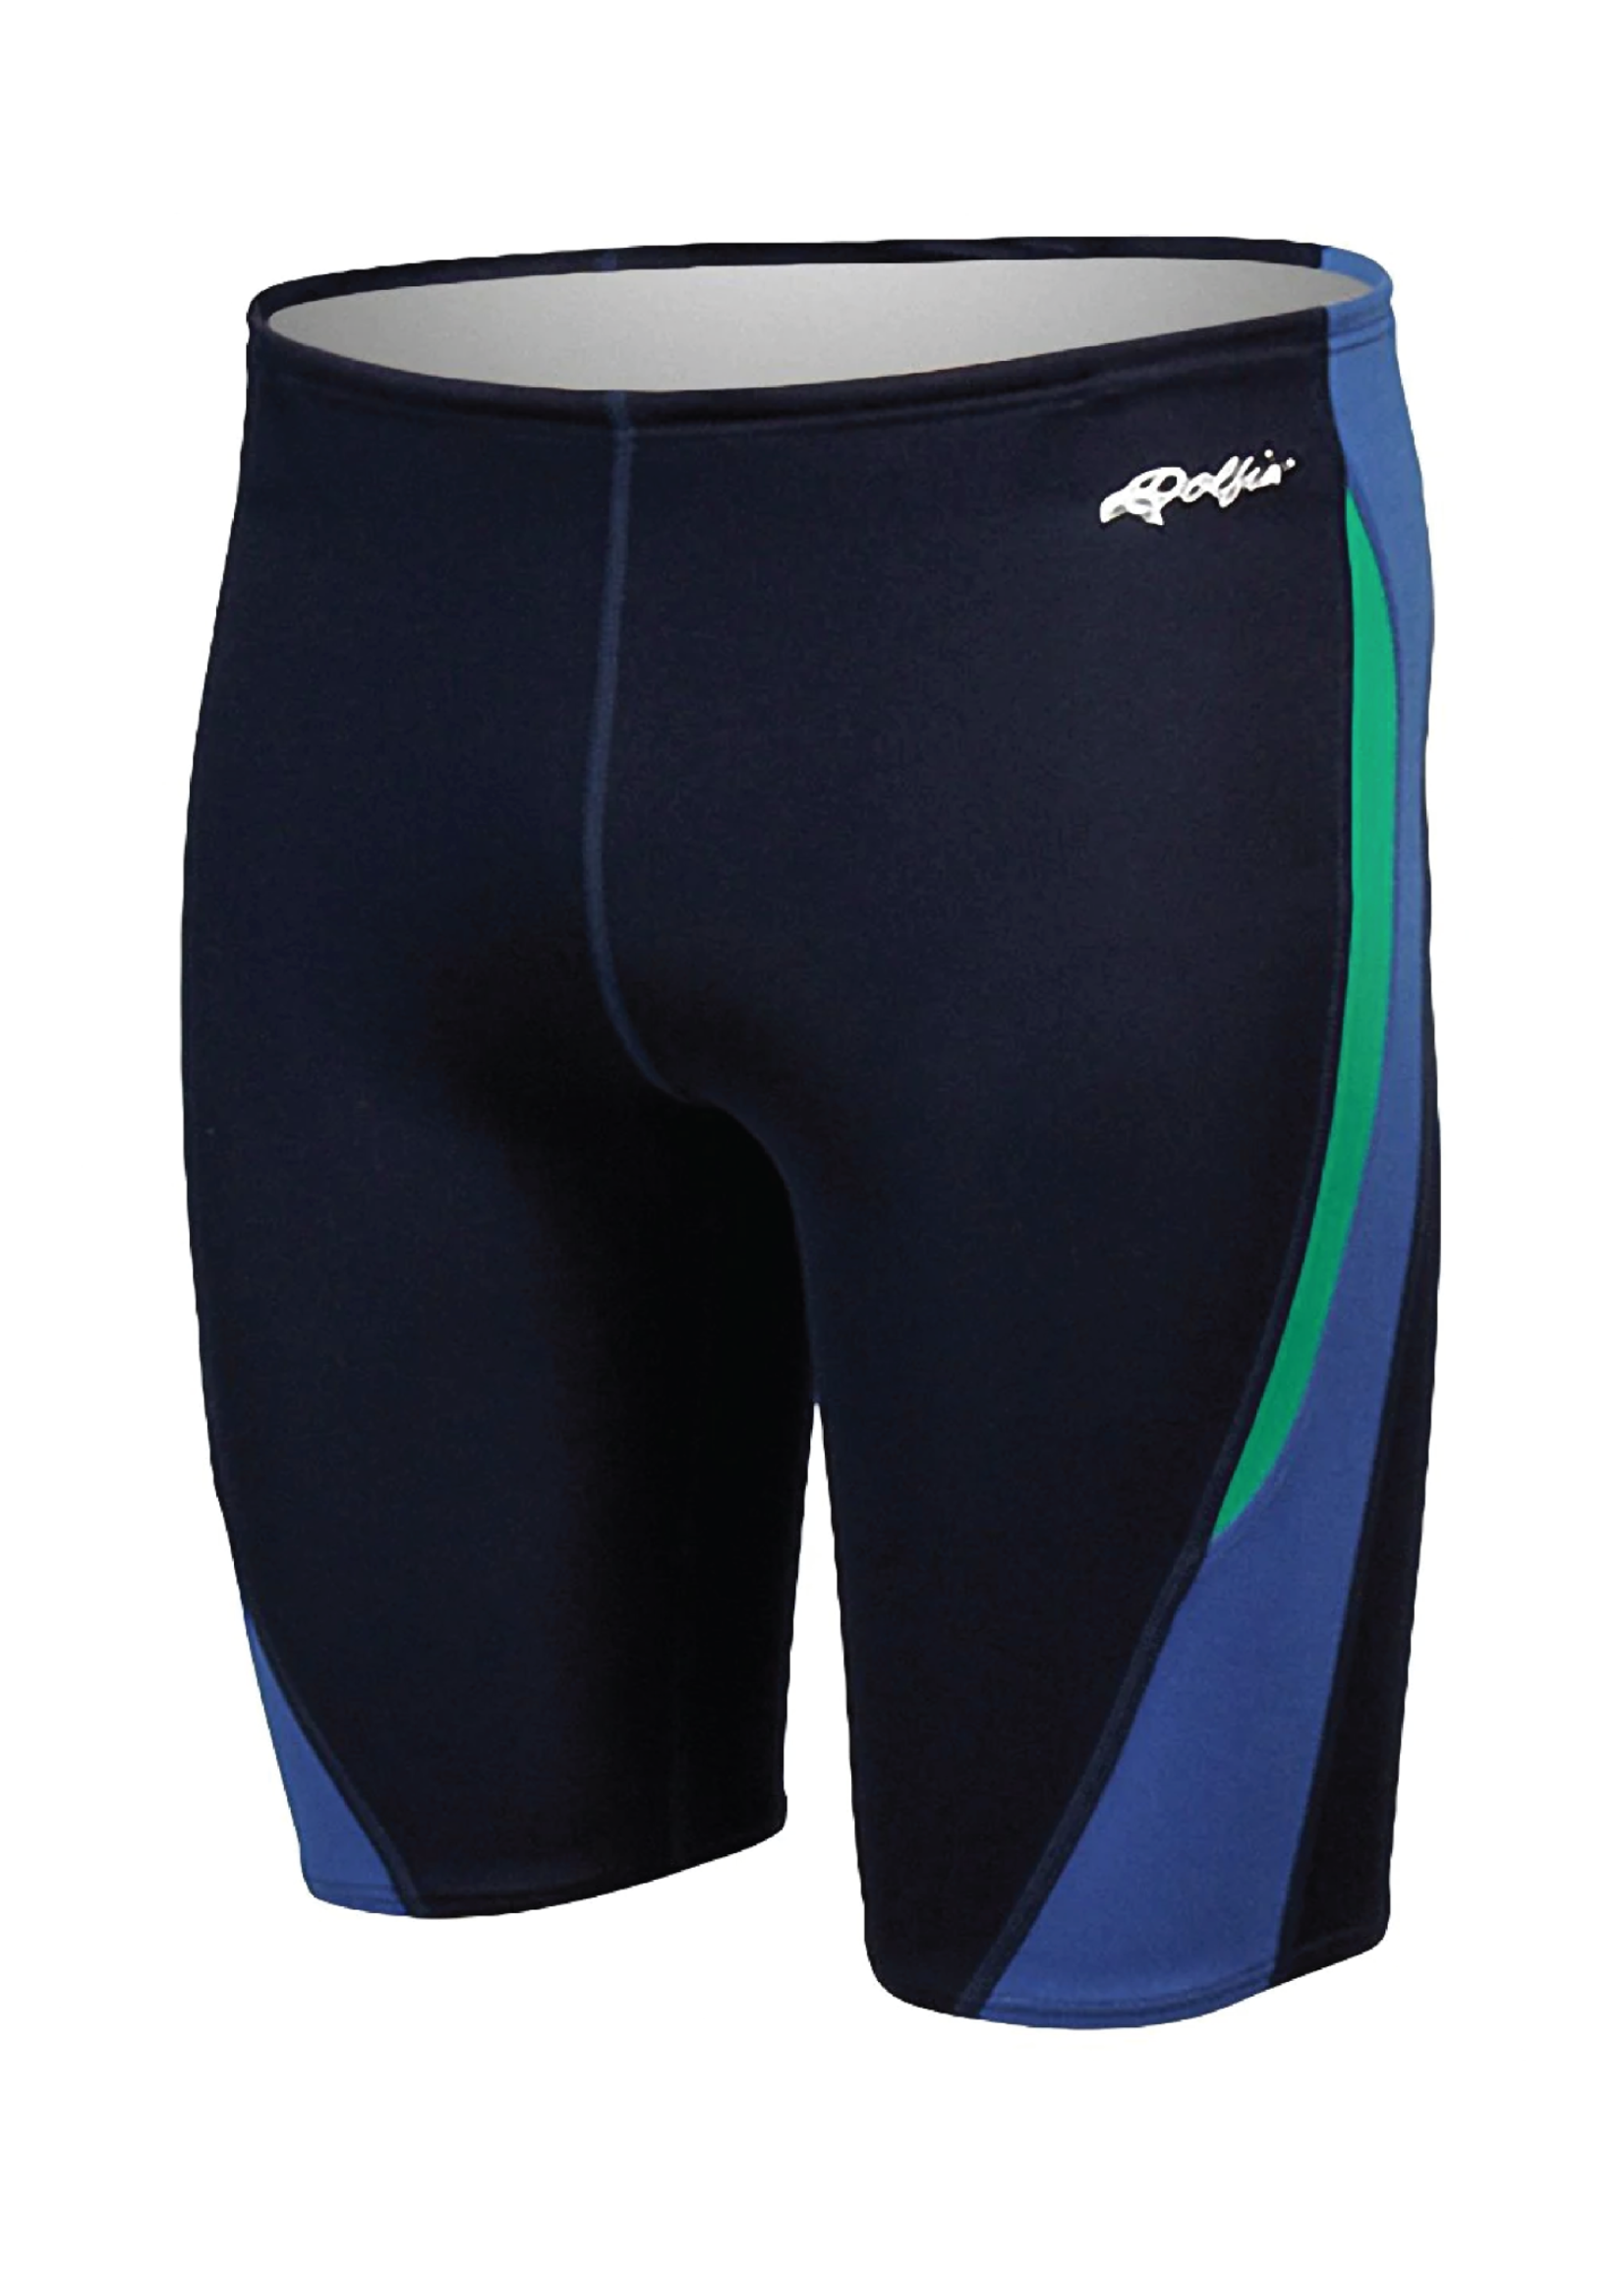 RELIANCE Colorblock Jammer 958 Navy/Blue/Green